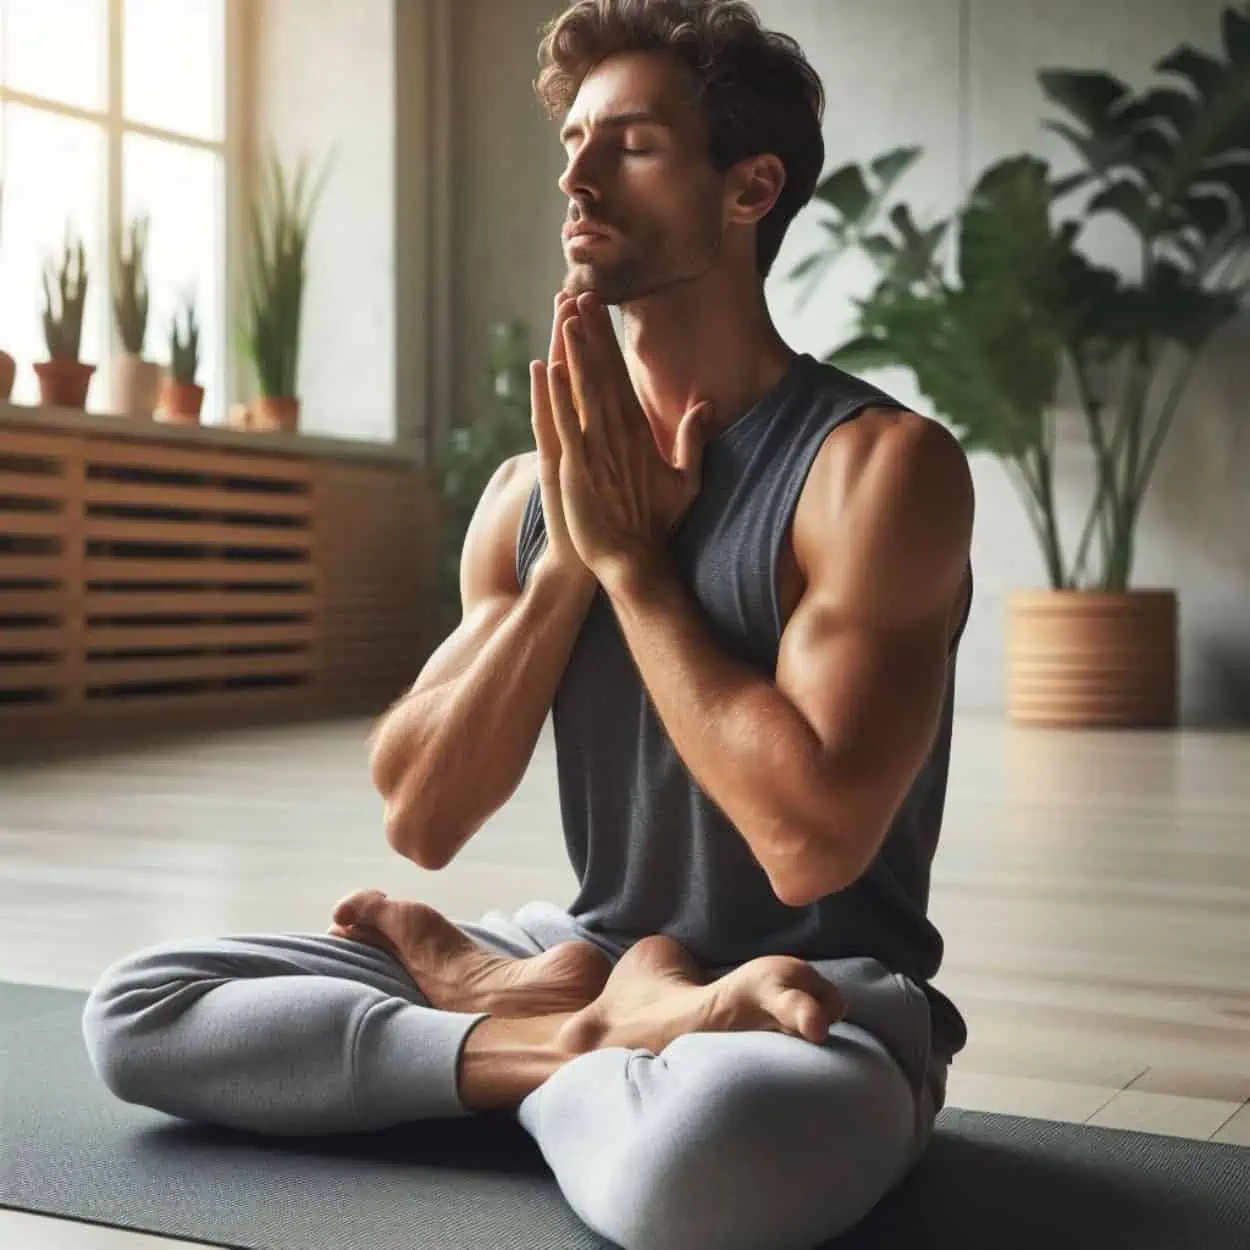 In this image a person is practicing Khechari Mudra